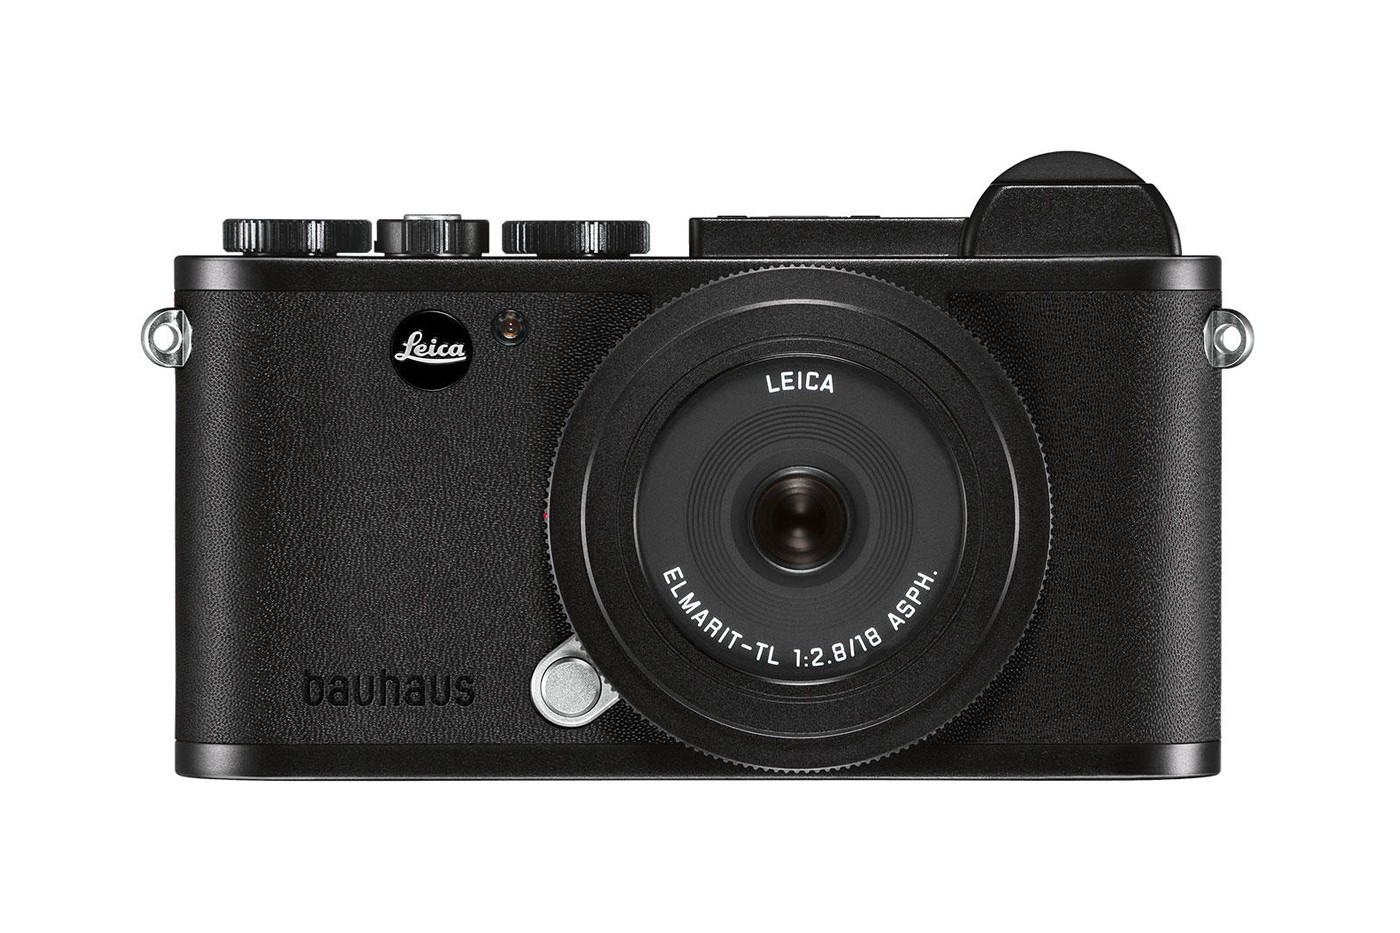 Leica Releases a Second Variation of the CL Bauhaus 100th 